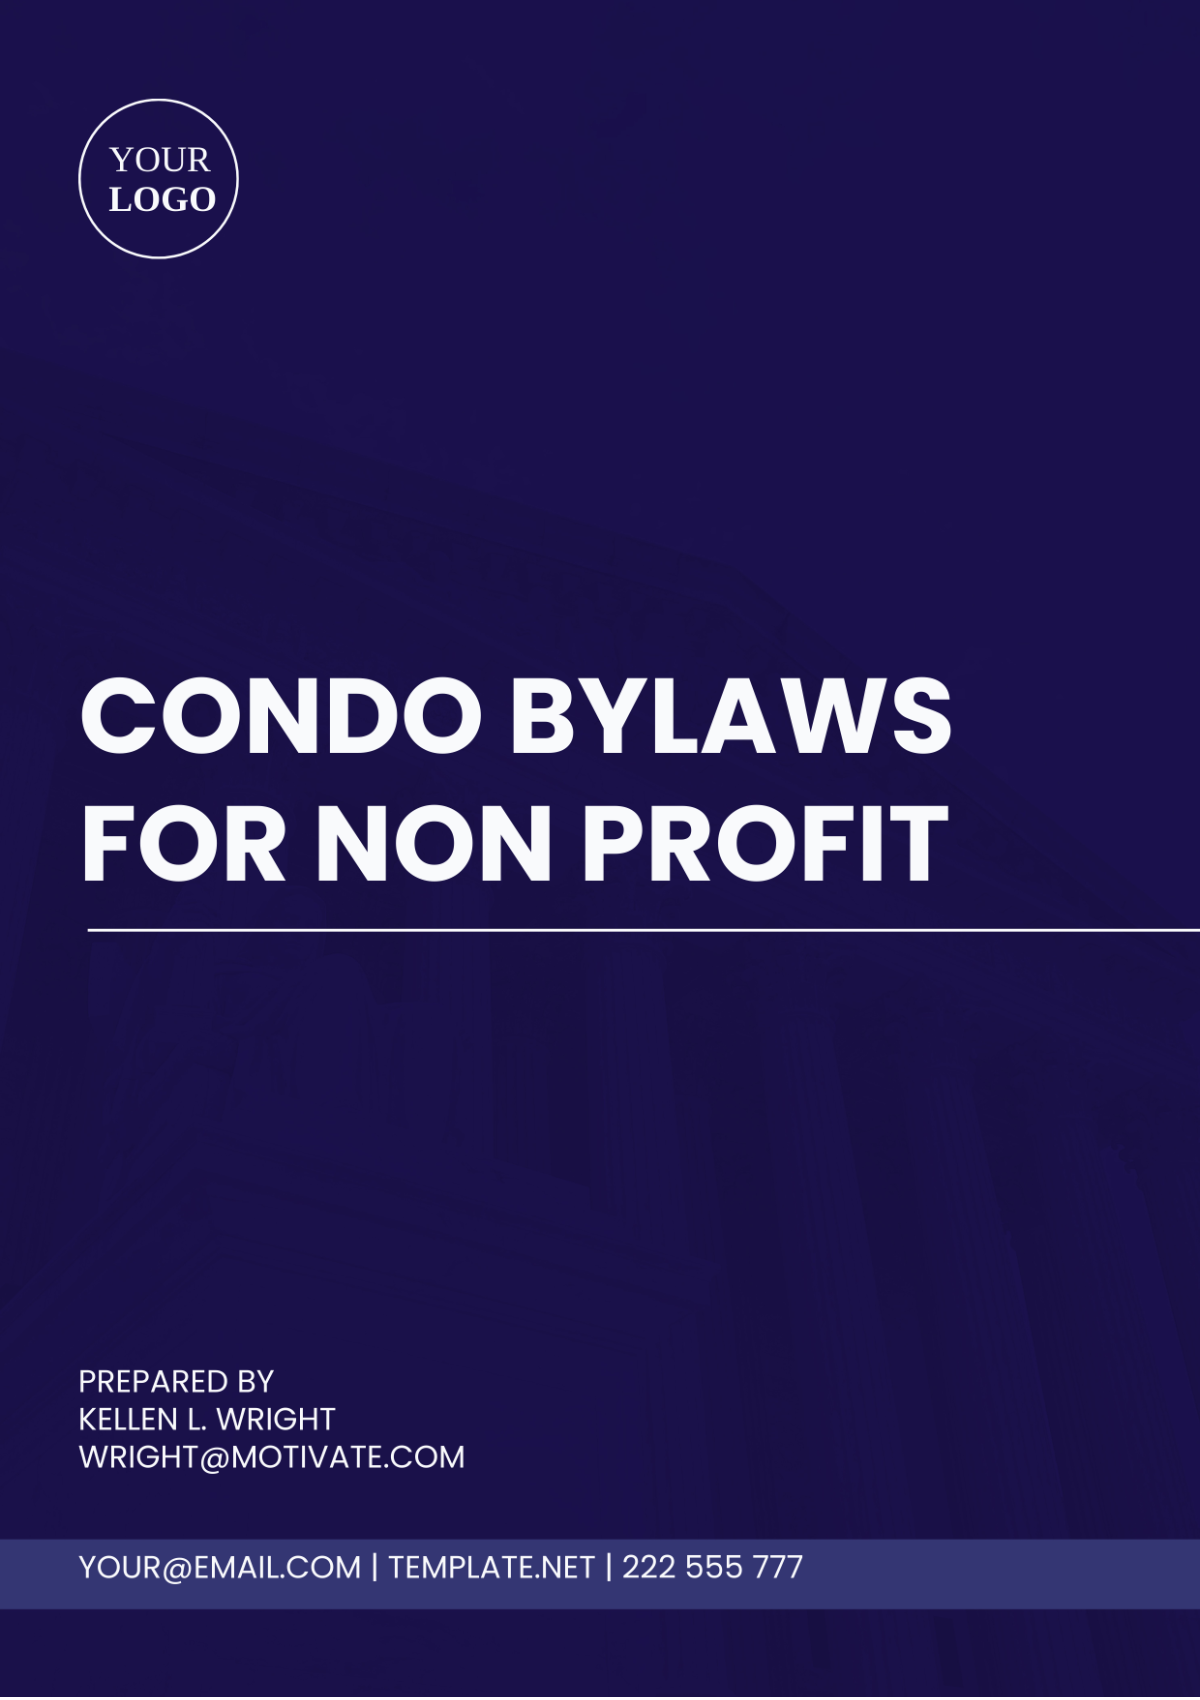 Free Condo Bylaws for Non Profit Template